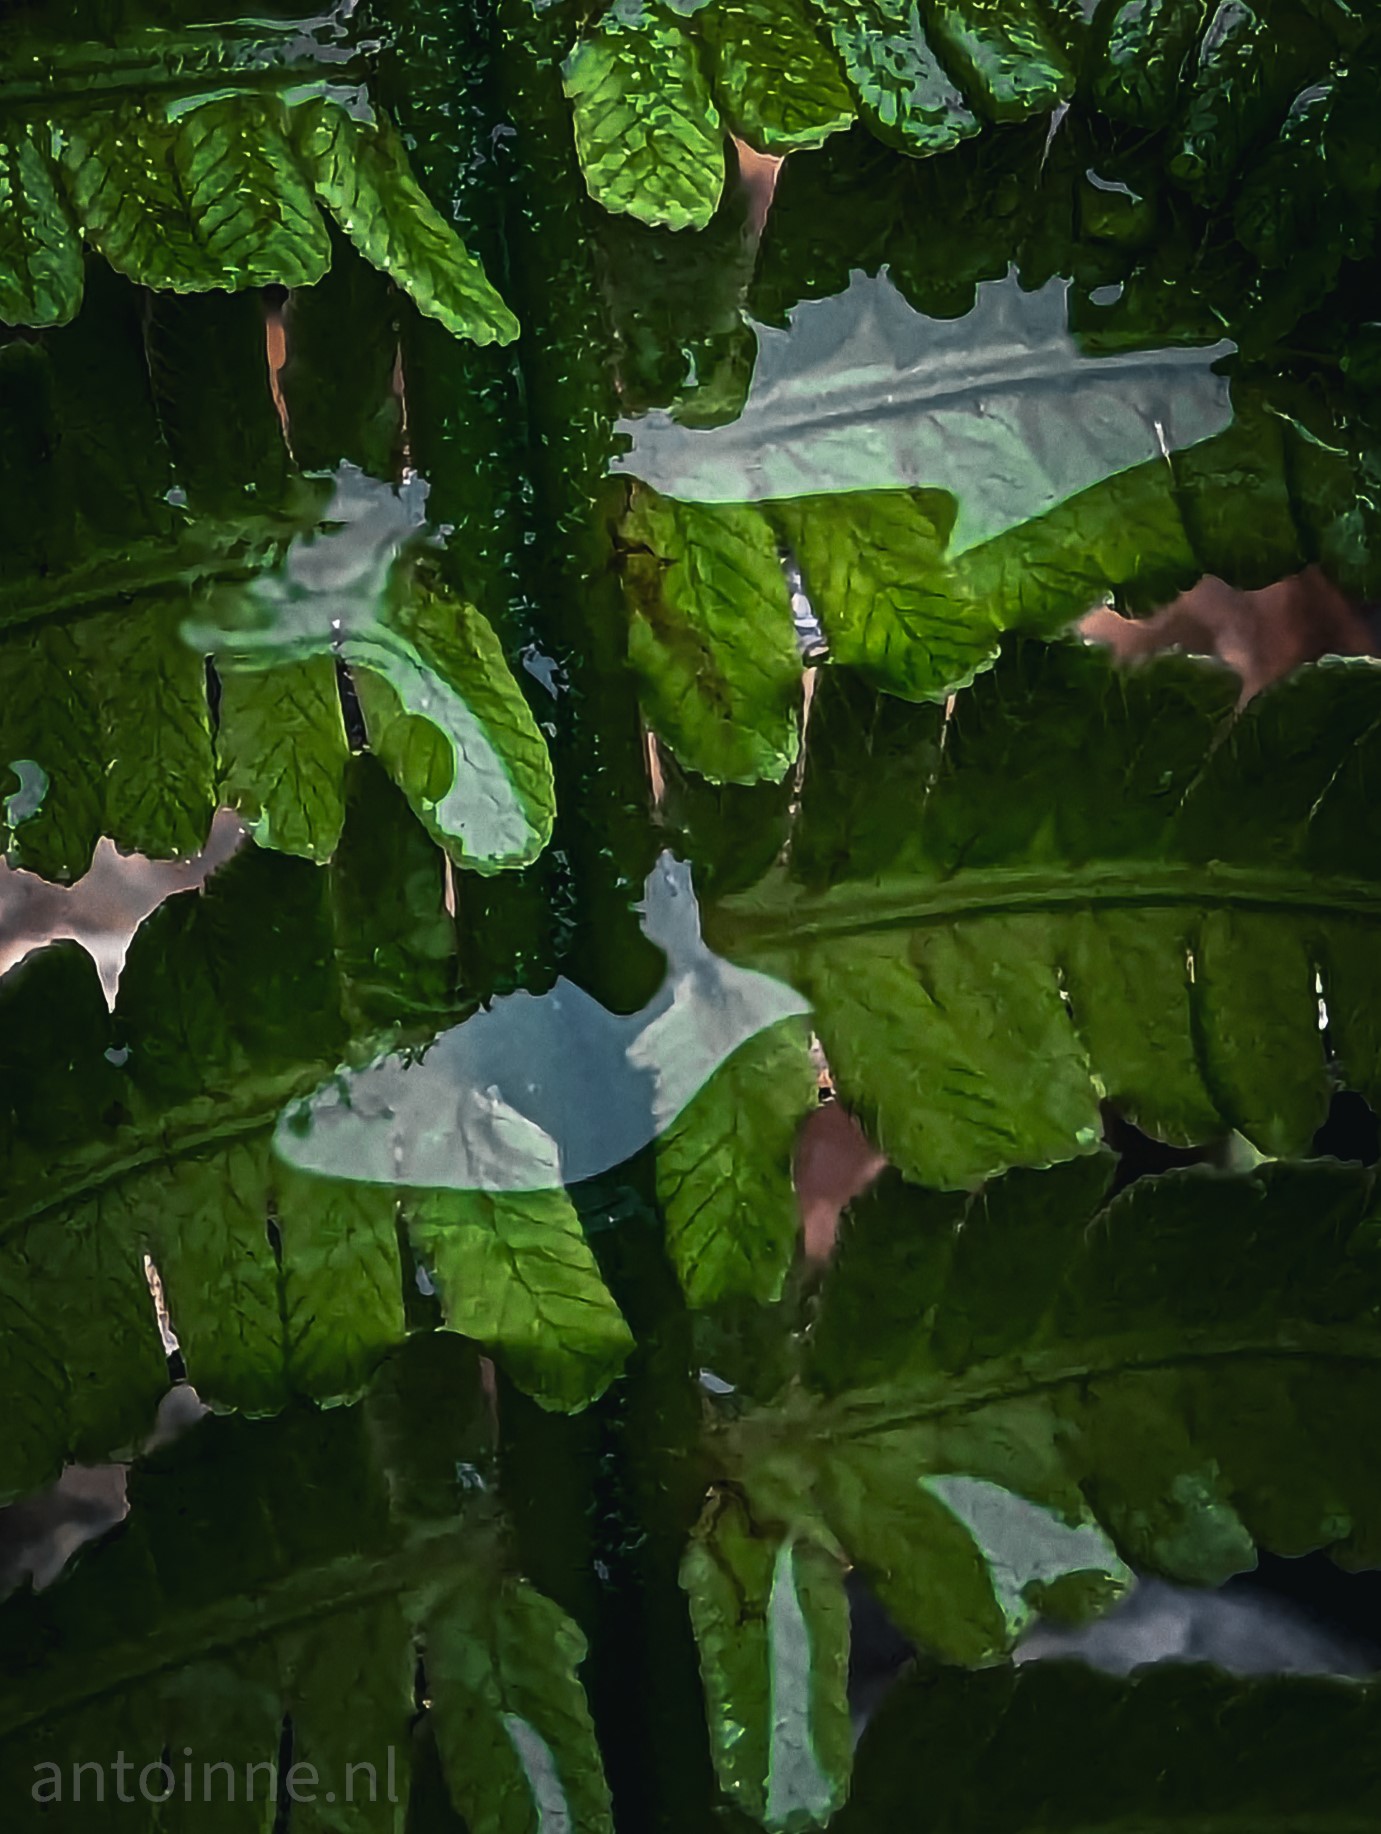 Small puddles of water on the leaf of a green fern